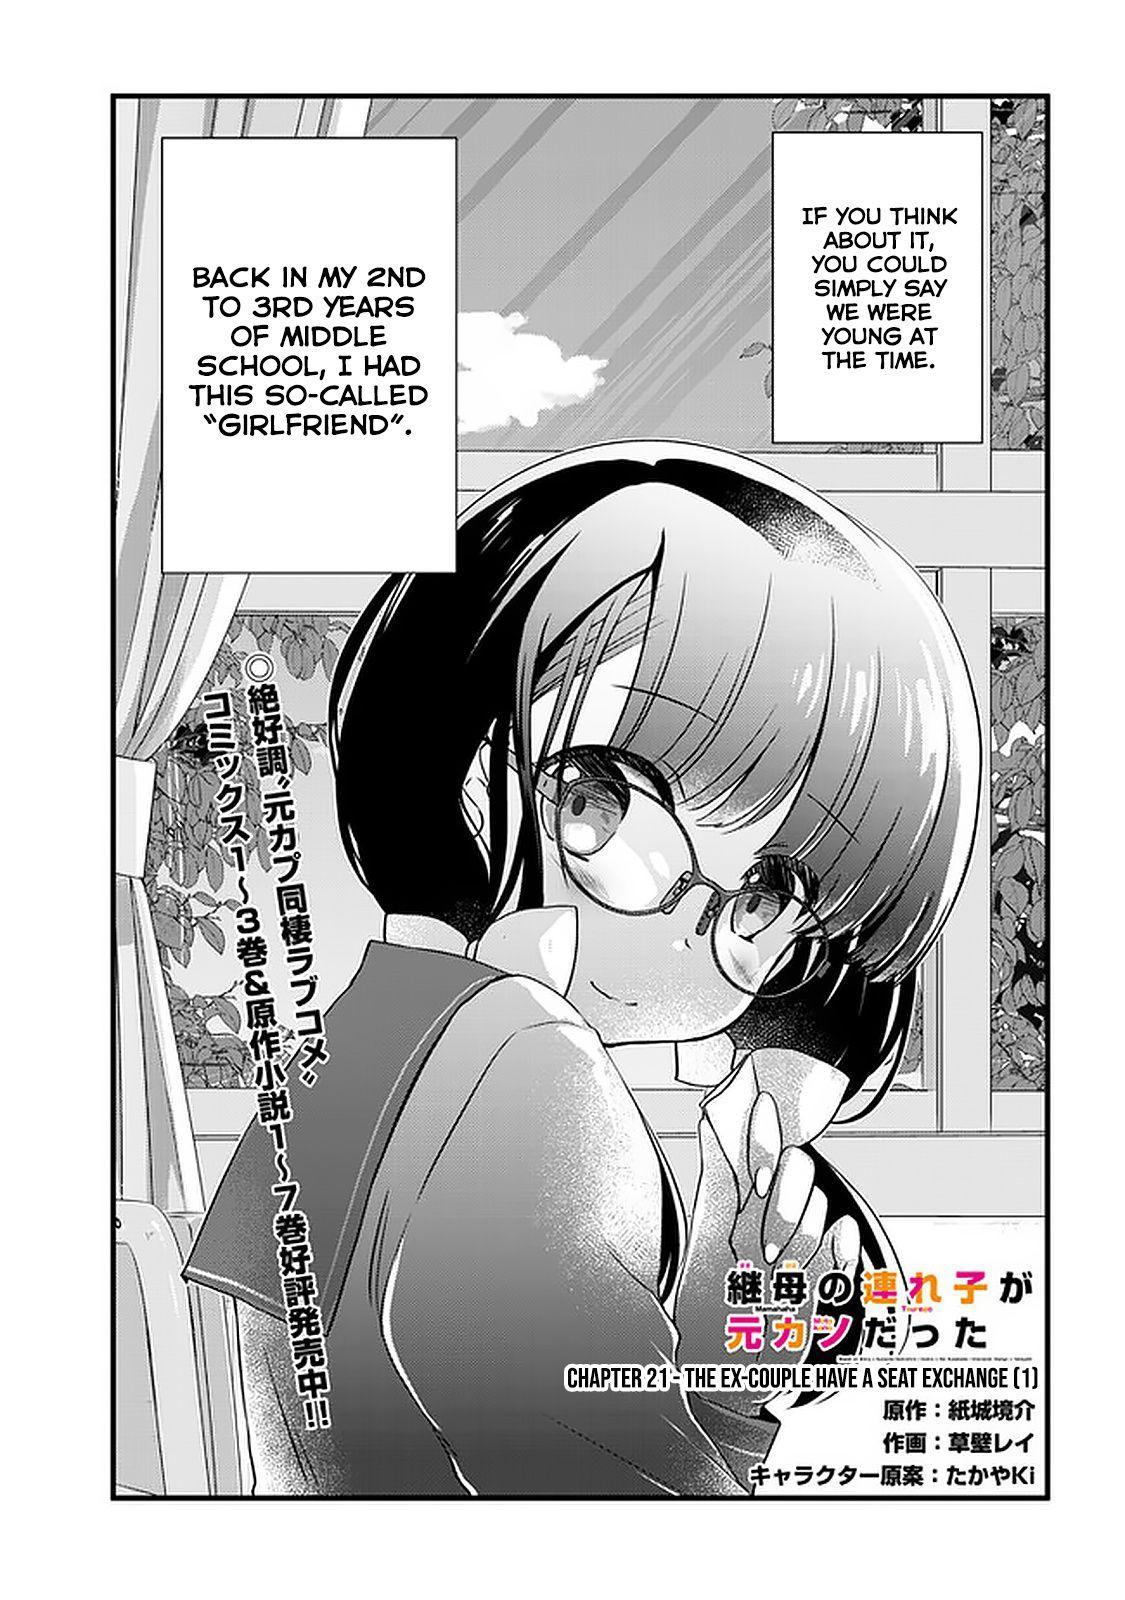 Back To School - Chapter 21